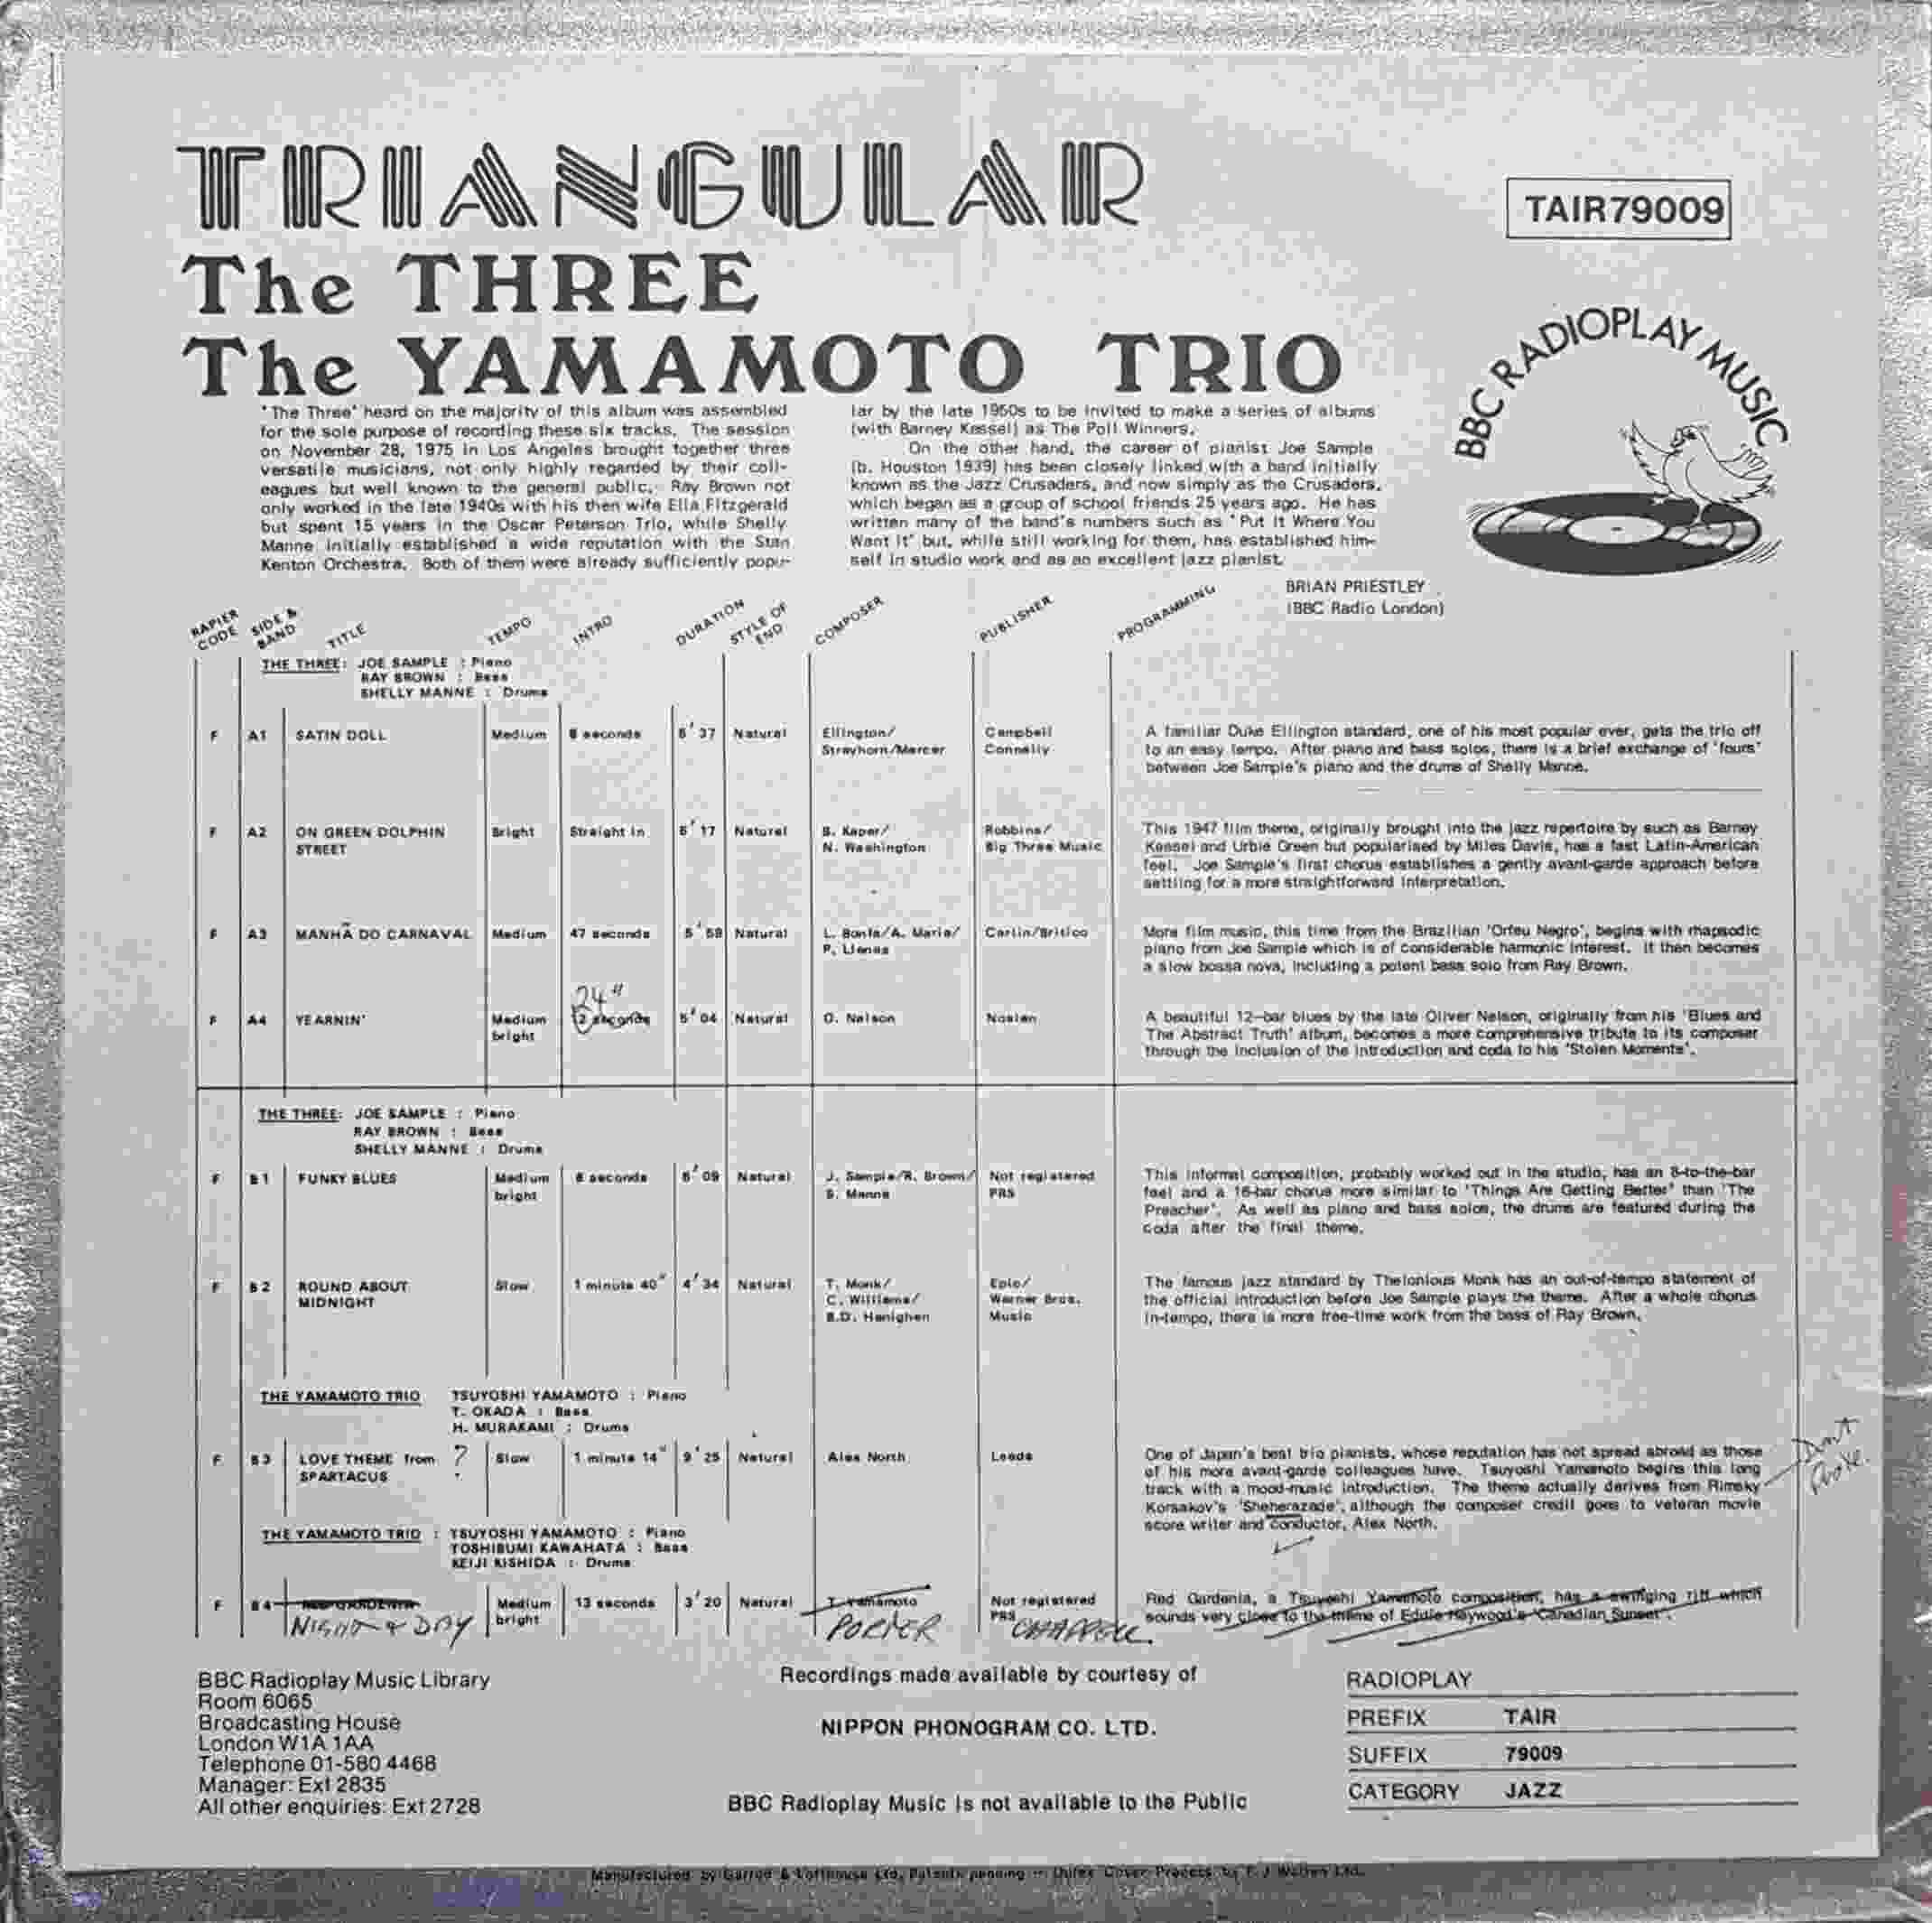 Picture of TAIR 79009 Triangular by artist The Three The Yamamoto Trio from the BBC records and Tapes library